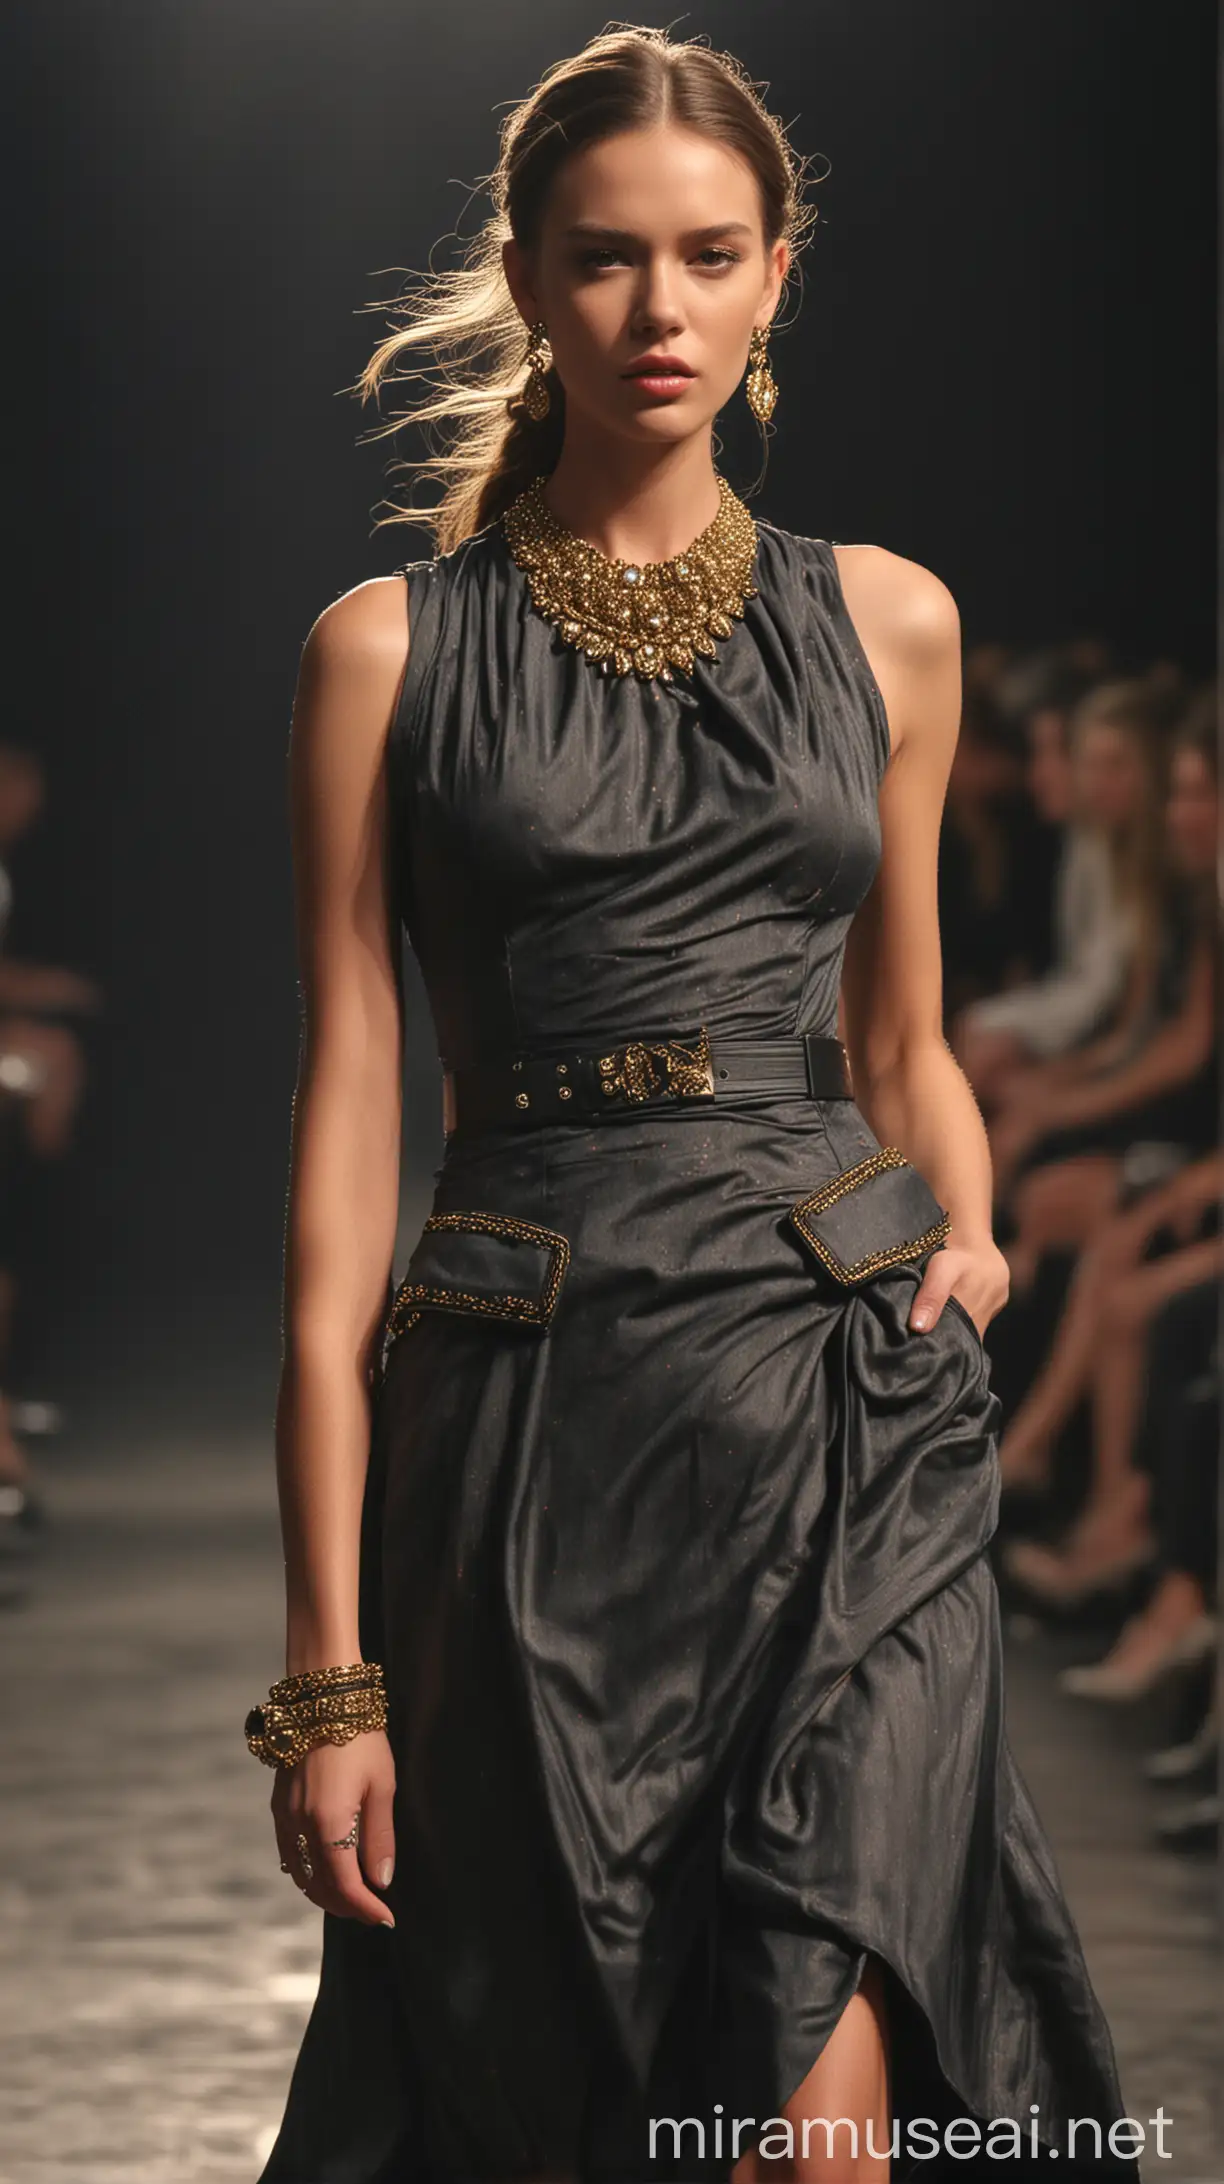 Montelago Fashion Show Supermodel in Chic Dress with Statement Jewelry